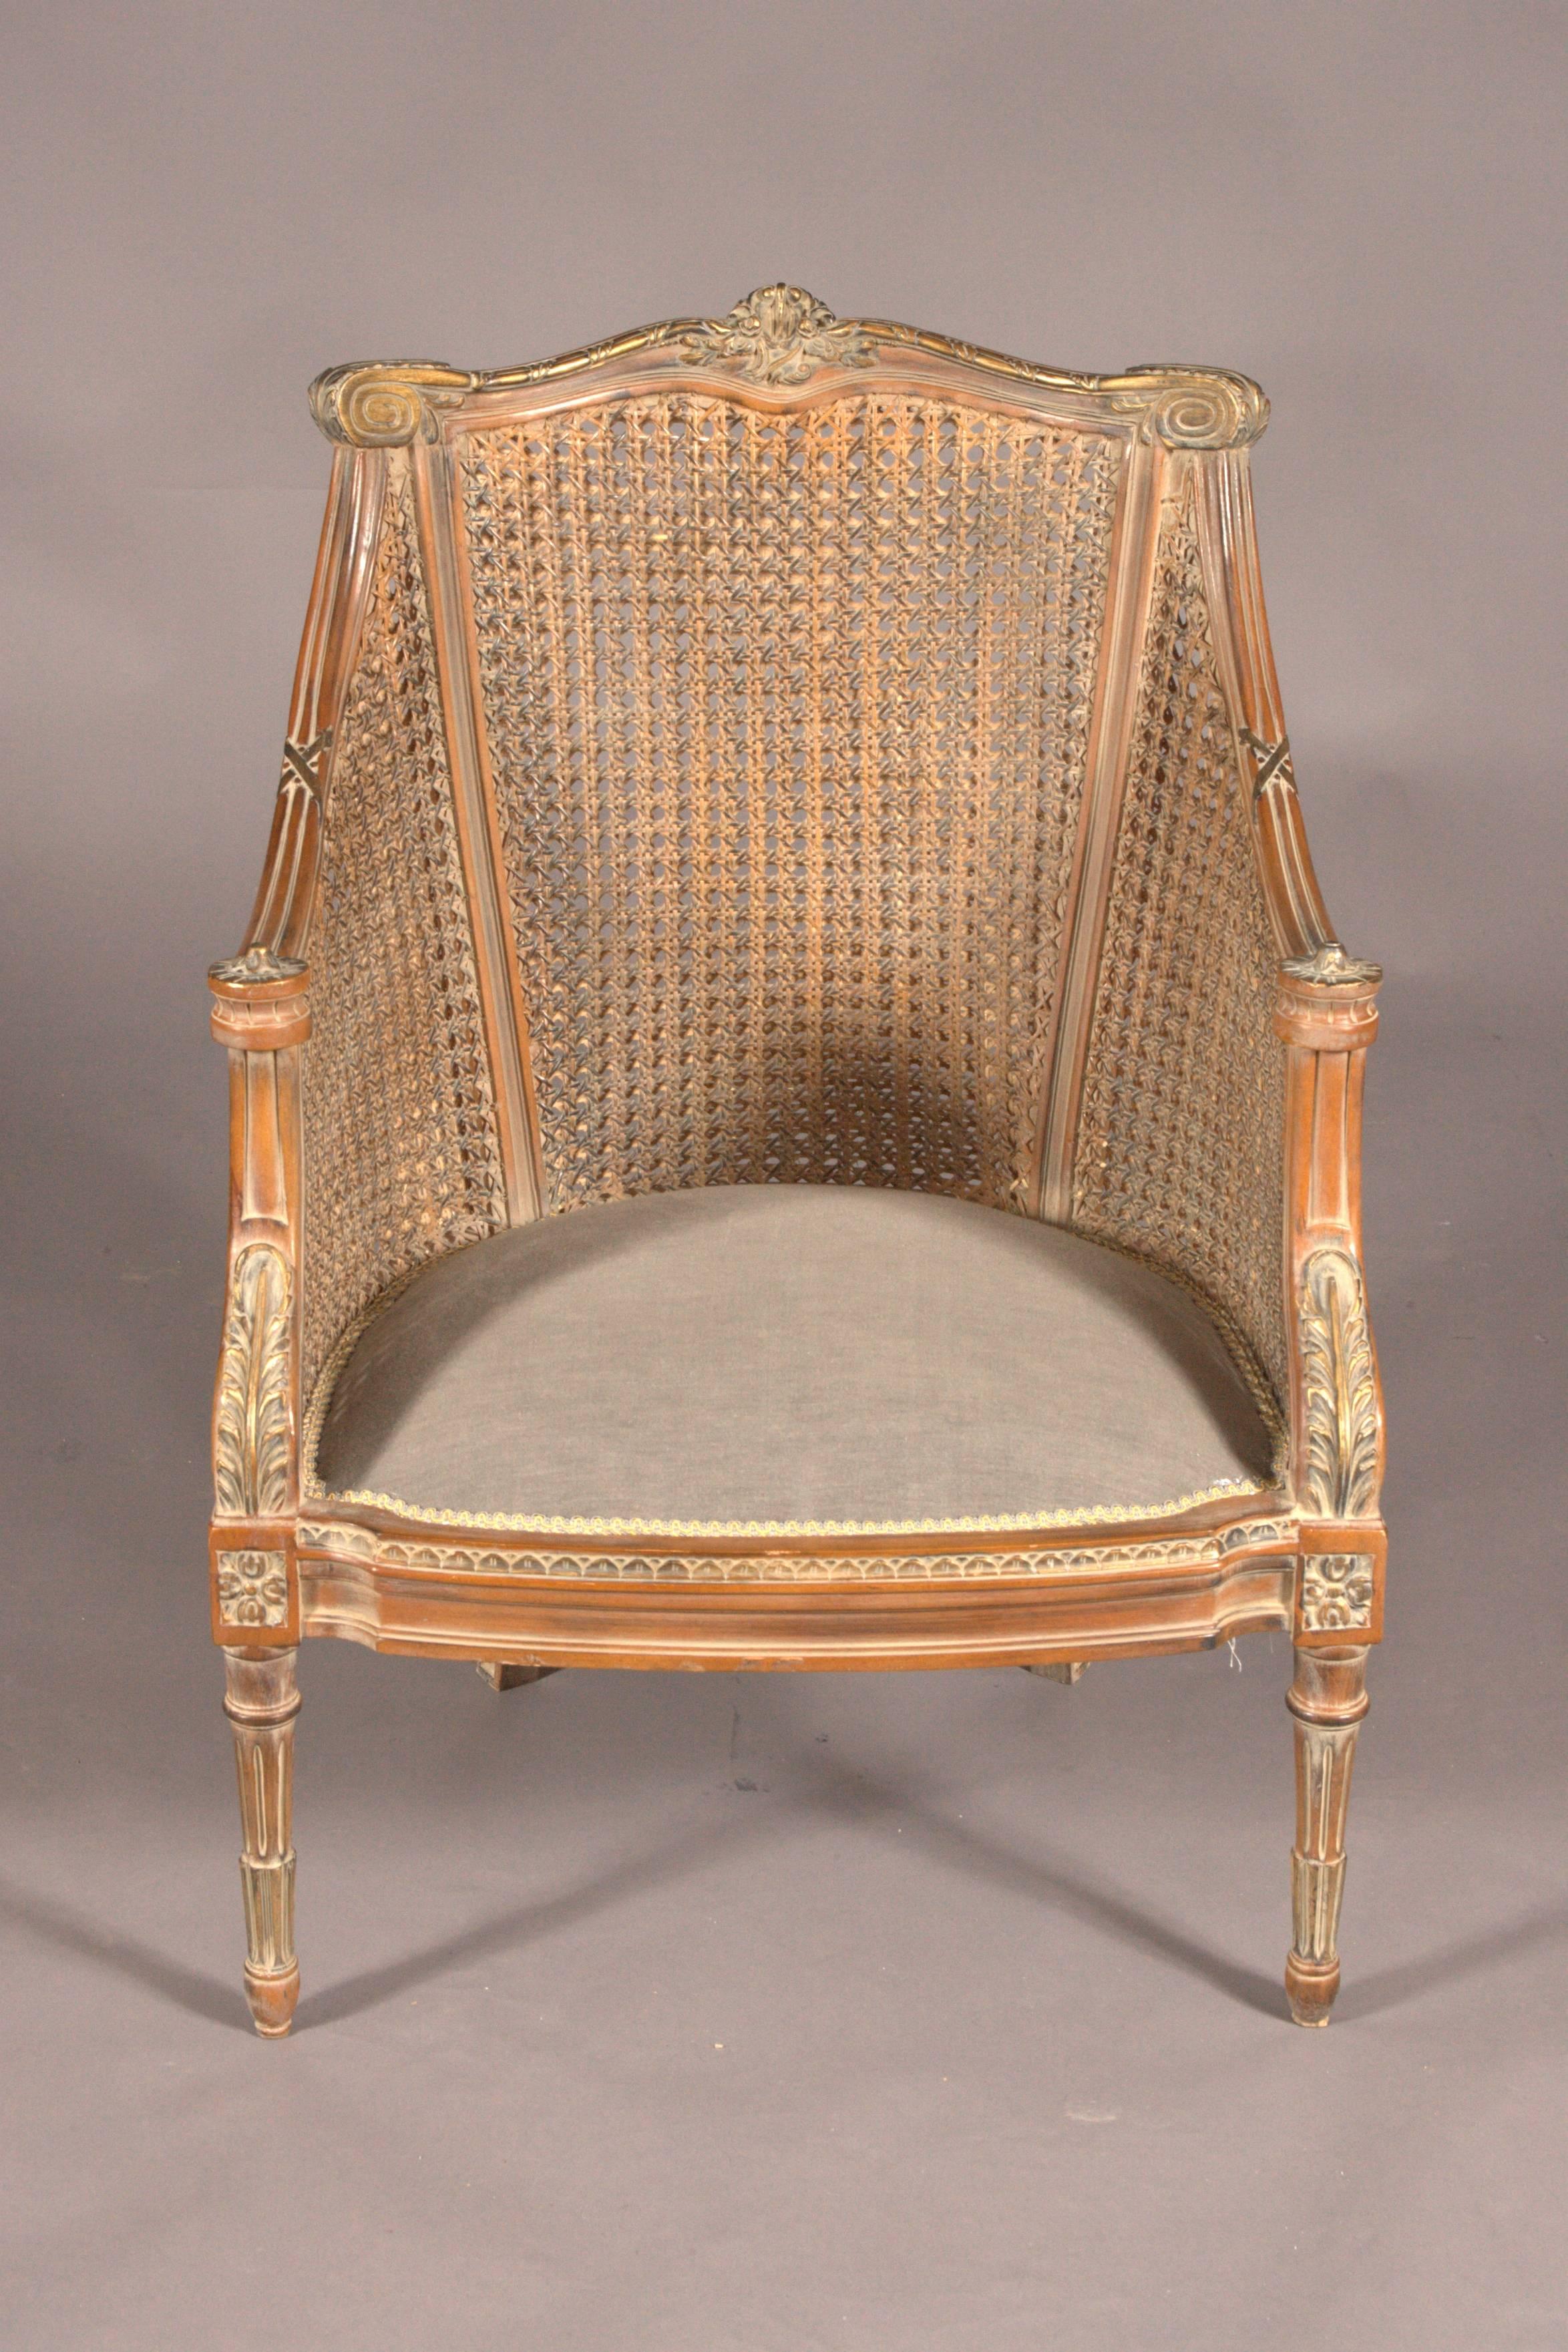 Etruscan decor in English style. Solid beechwood, carved and colored. Slightly scalloped frame on meshed legs. Beveled, flat, slightly rising armrests. Curved backrest frame with center ridge and beaded crown. Seat padded. The back and sides of the